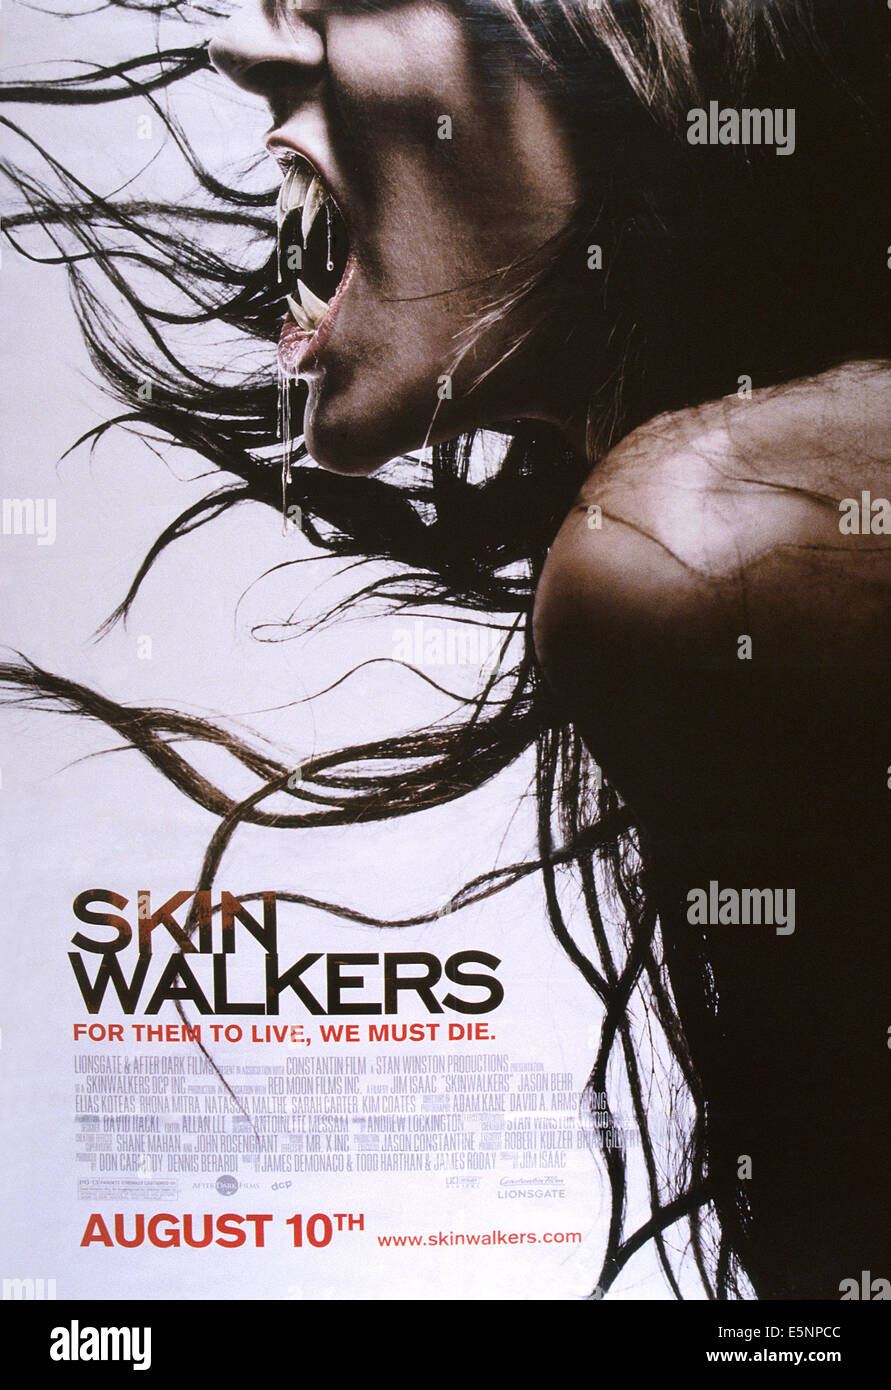 SKINWALKERS, US advance poster art, Natassia Malthe, 2006. ©Lions Gate/courtesy Everett Collection Stock Photo